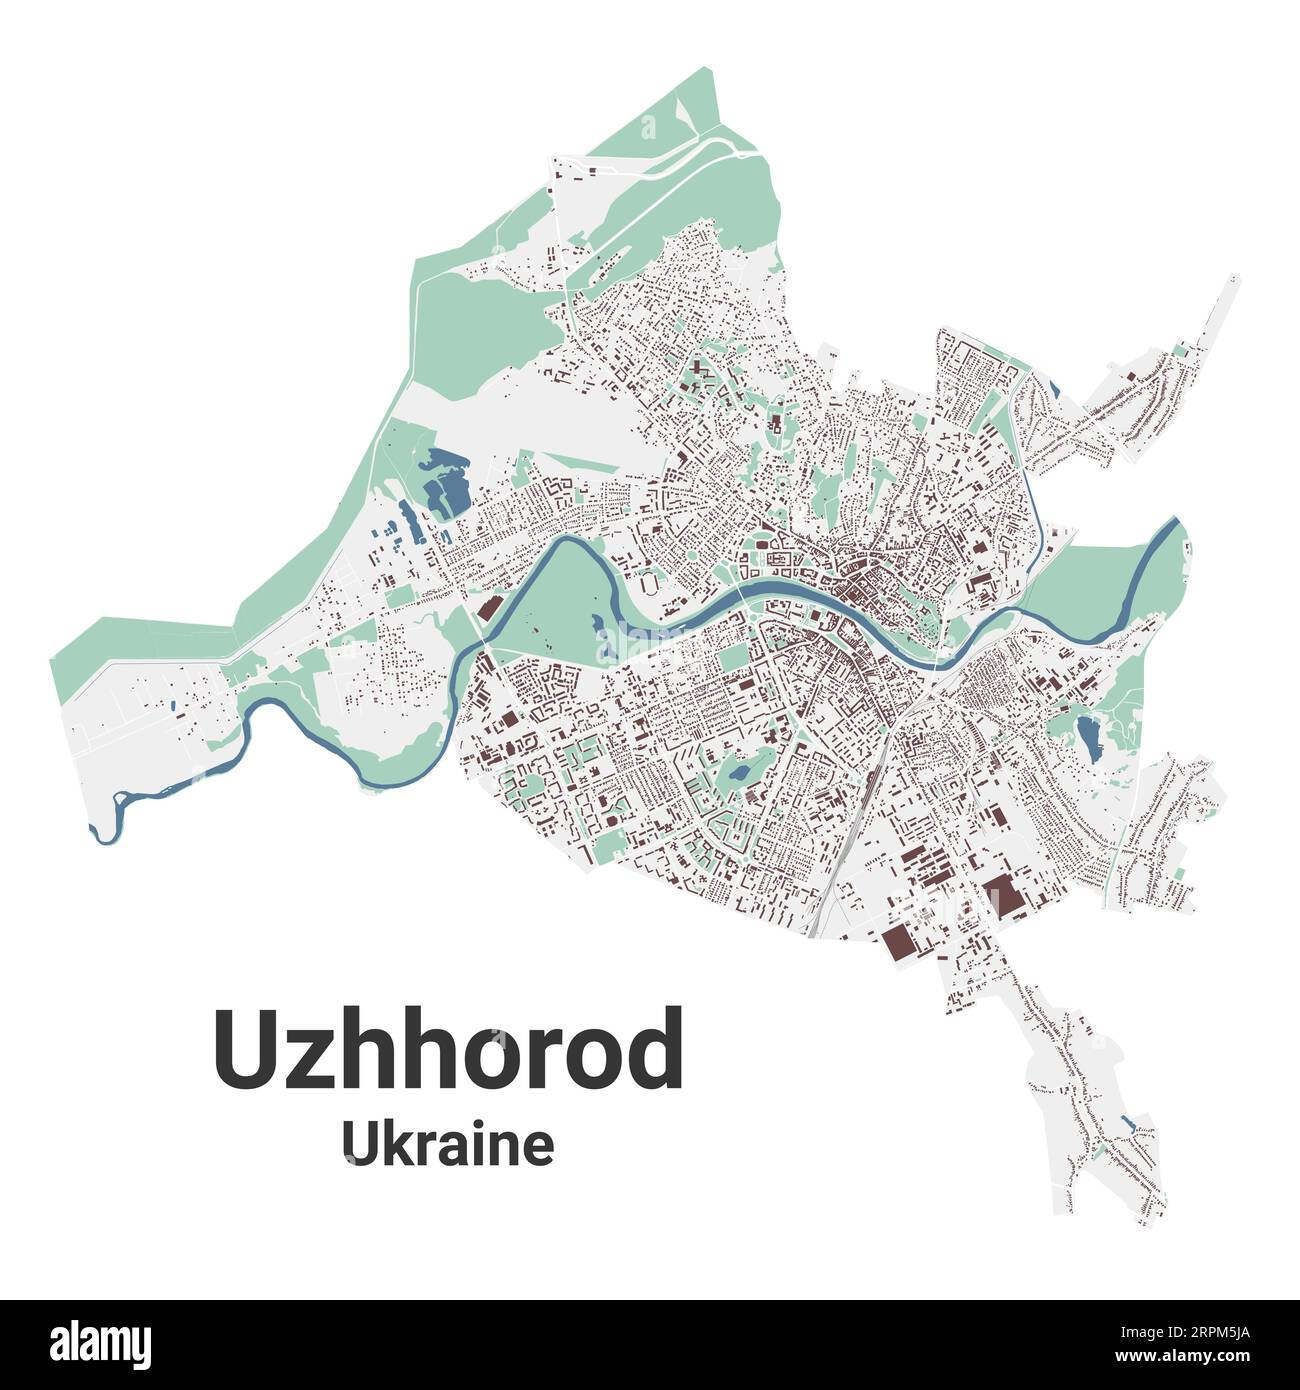 Uzhhorod map, city in Ukraine. Municipal administrative area map with buildings, rivers and roads, parks and railways. Vector illustration. Stock Vector